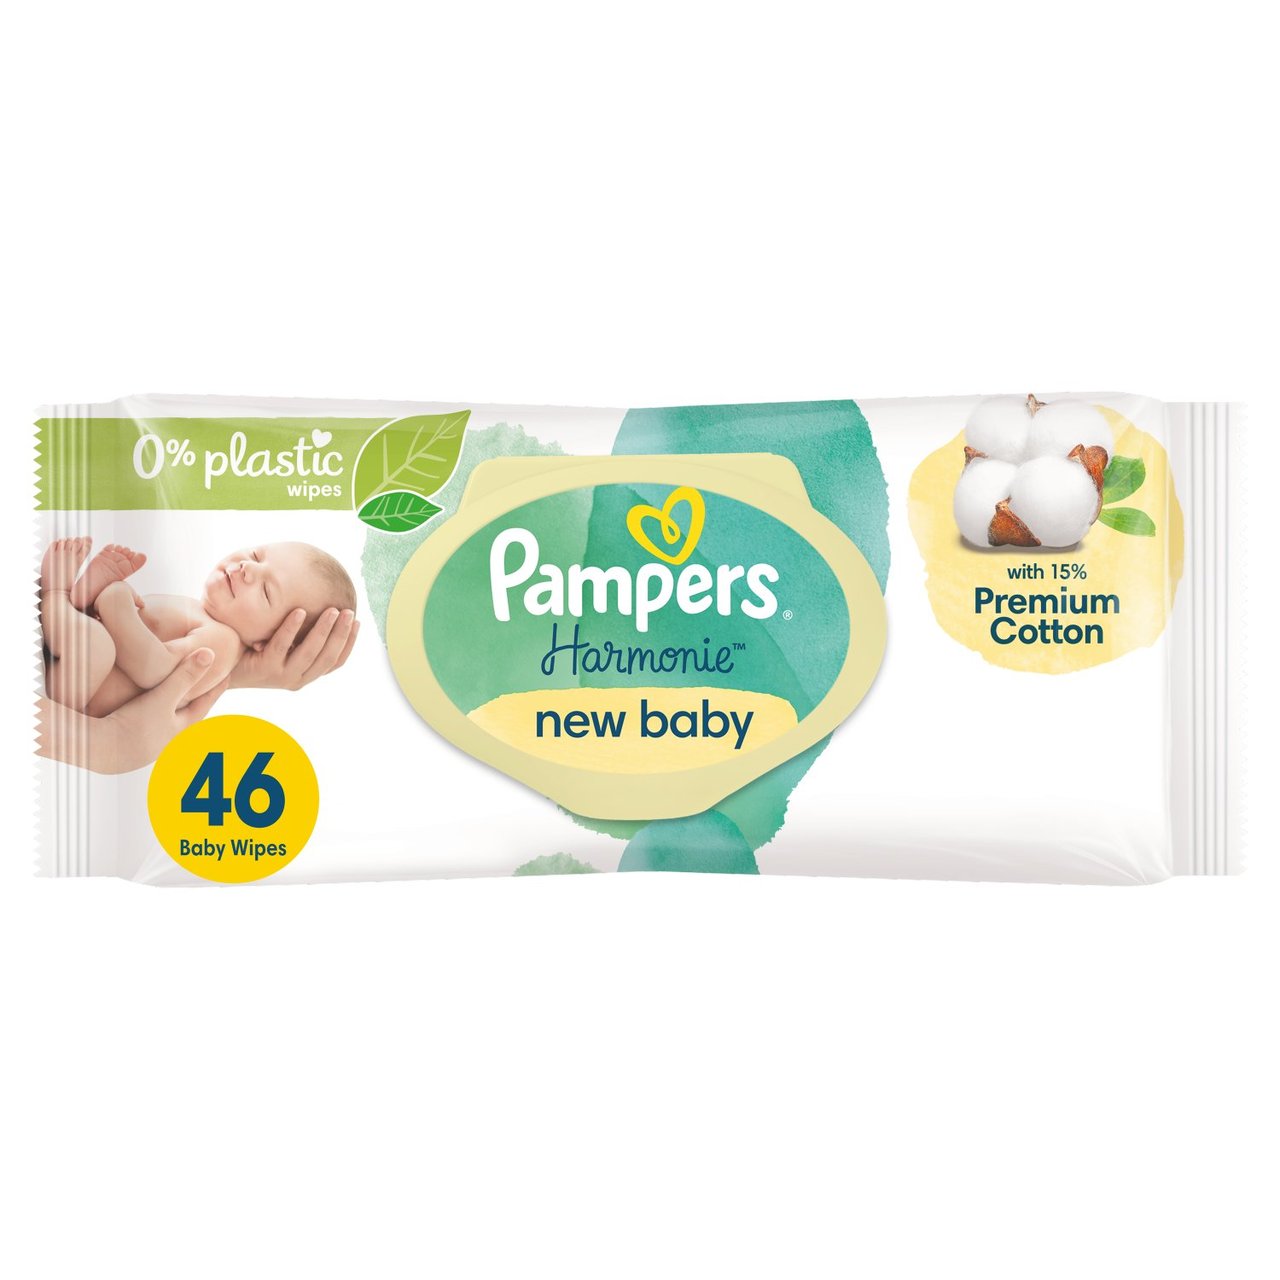 Pampers Baby Dry Nappy Pants Jumbo+ Pack Nappies Size 8, 19kg+ x44